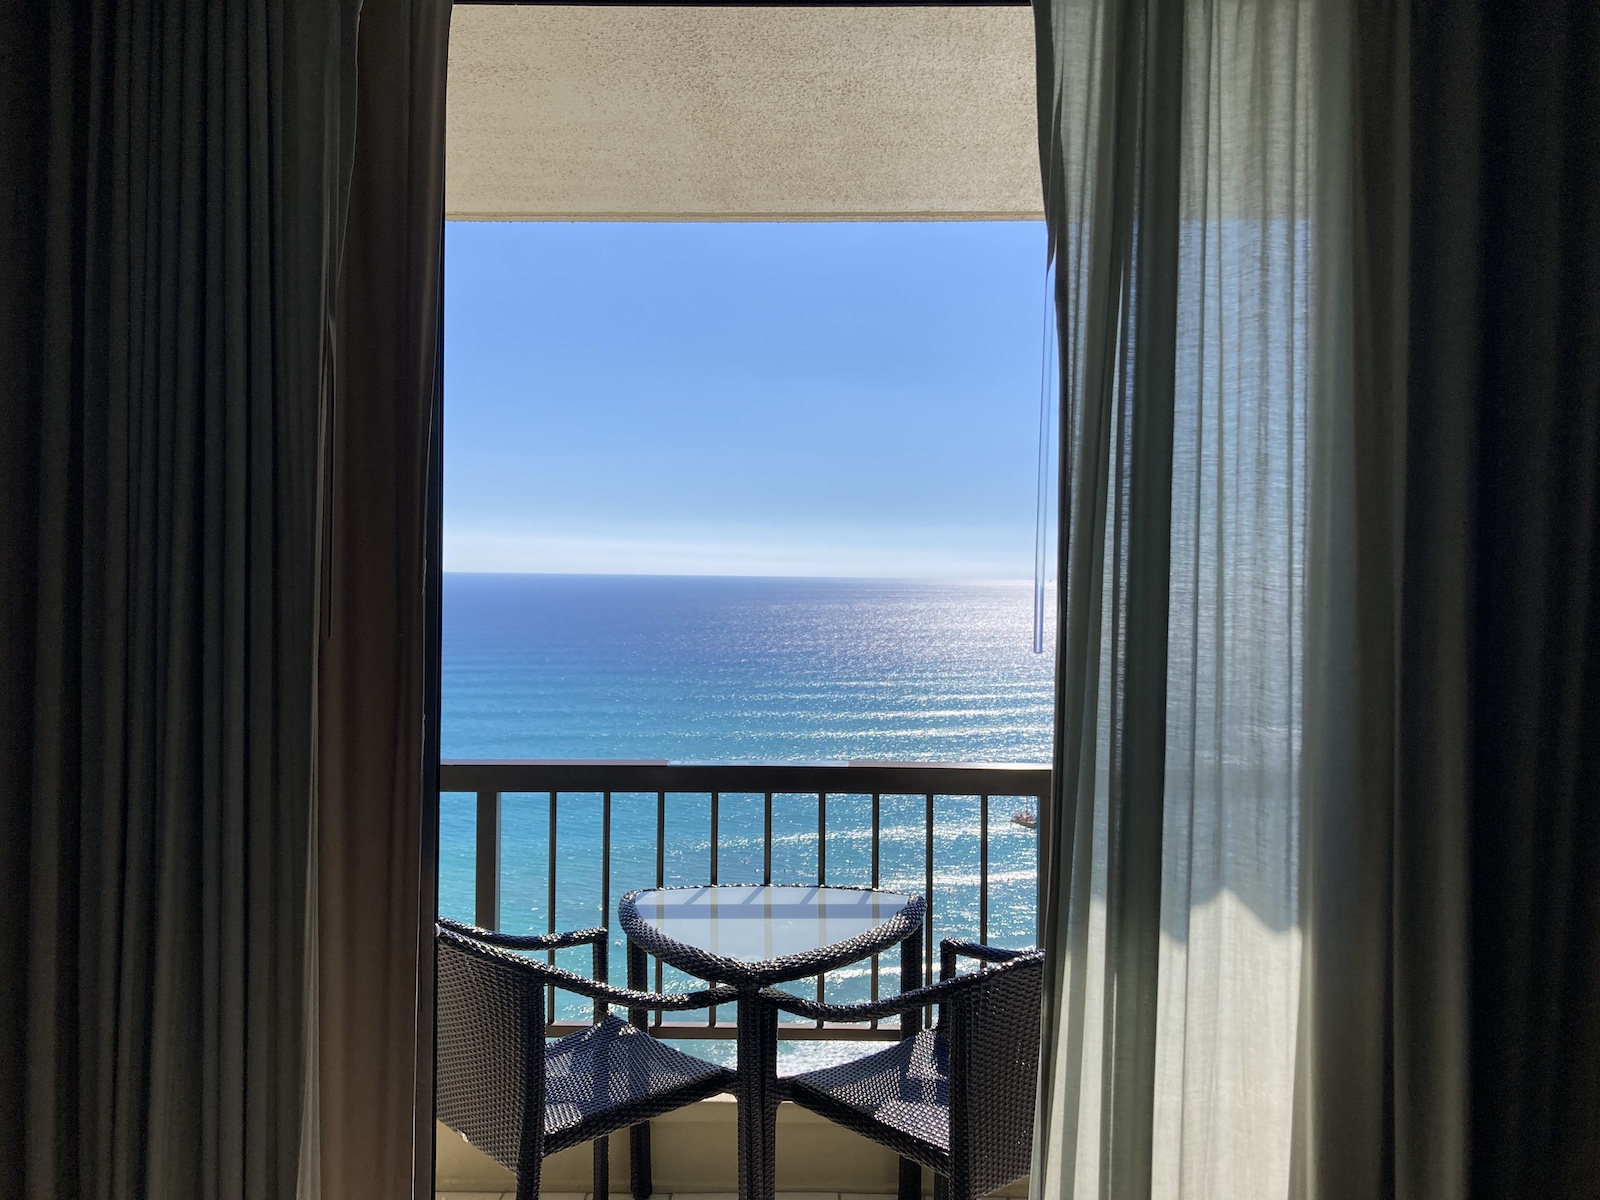 Photo of the glass sliding doors opening to a balcony with 2 chairs and small table, looking over the ocean and beach from our room at Hyatt Regency Waikiki